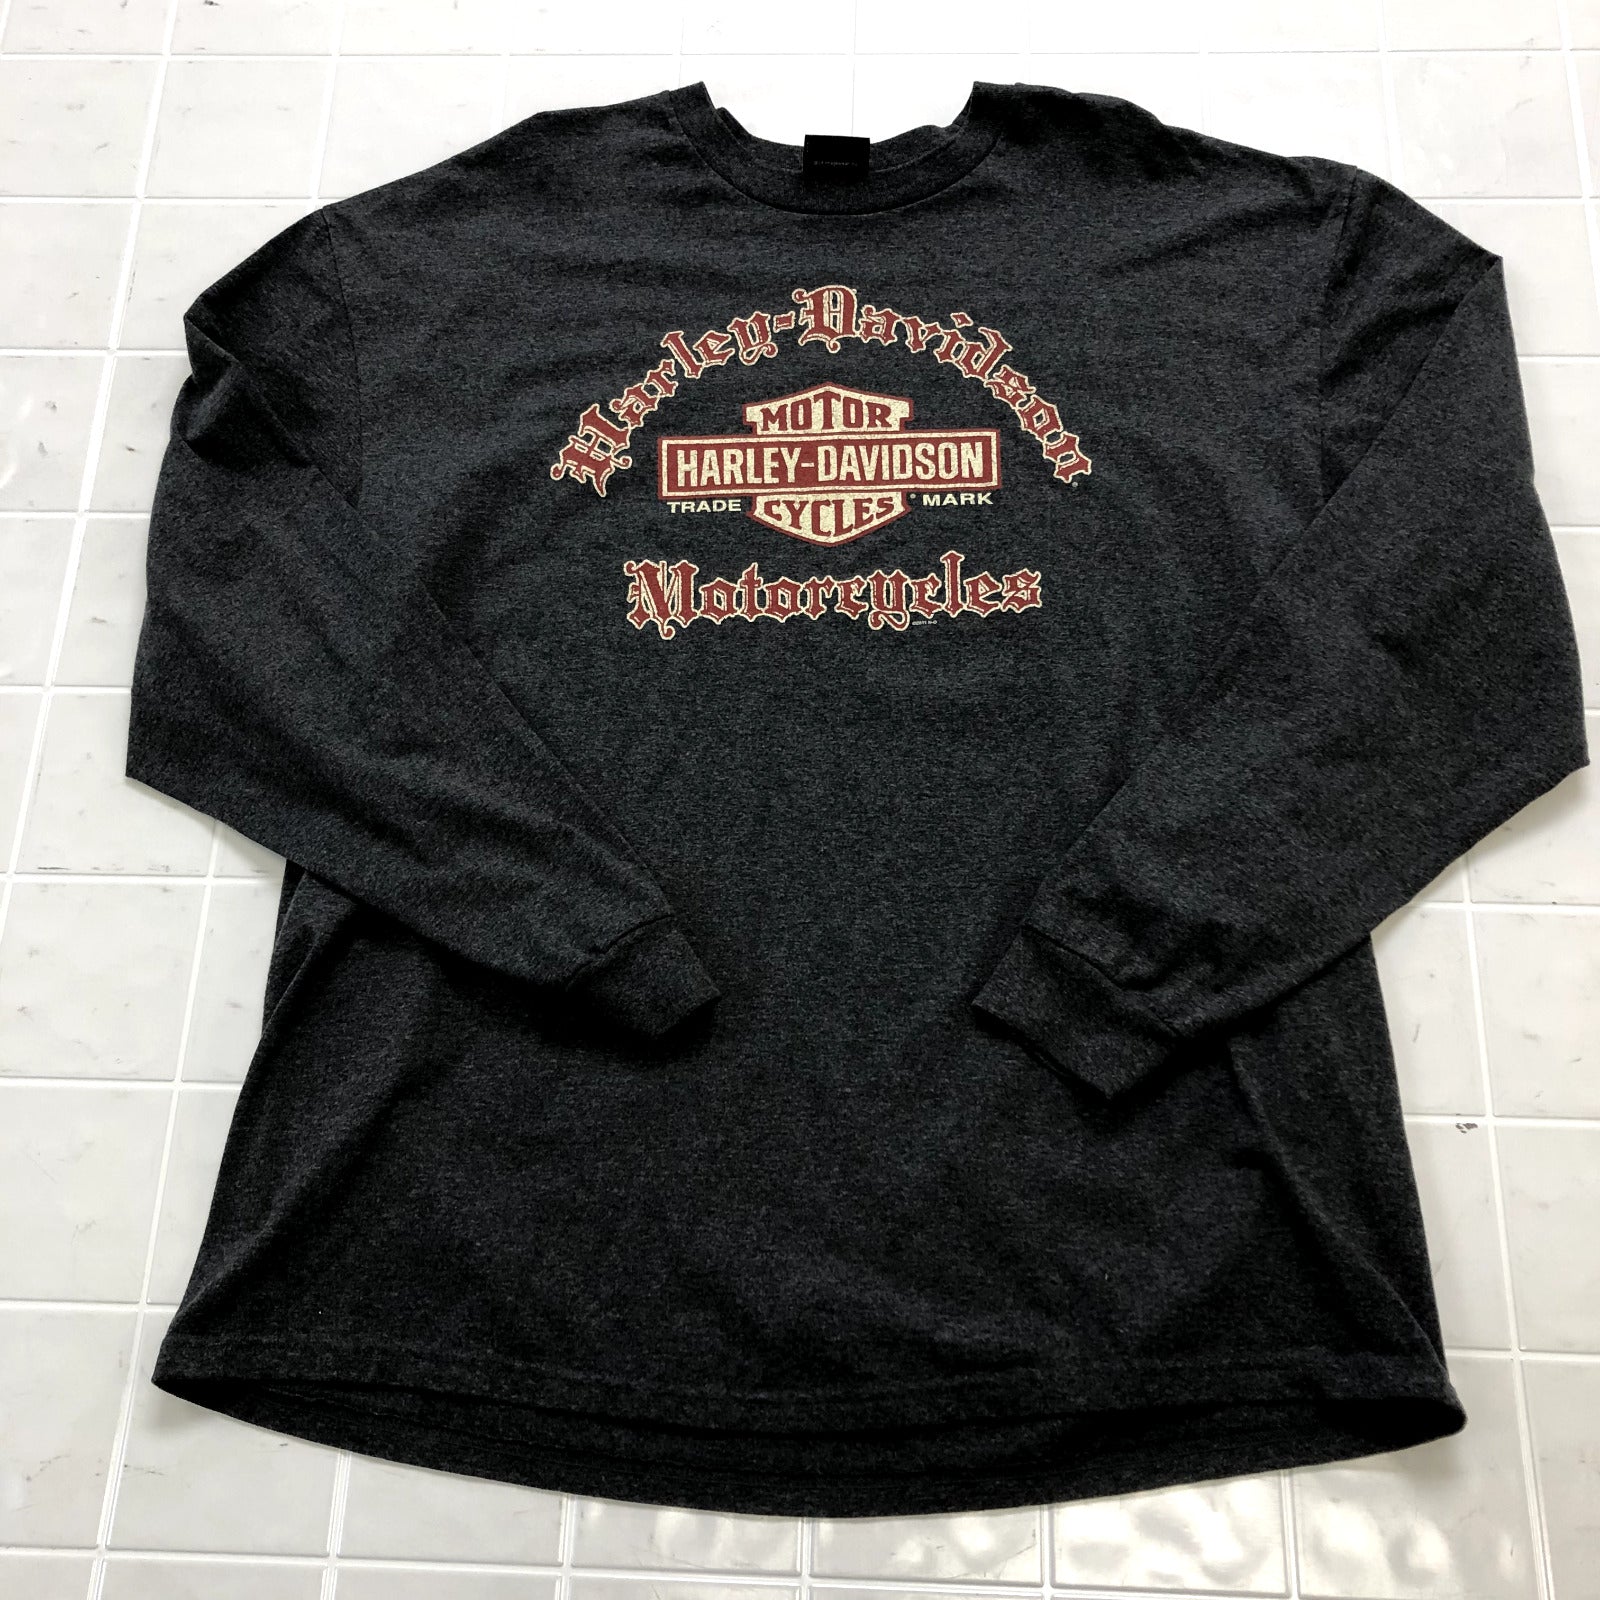 Harley Davidson Motorcycles Charcoal Graphic Logo T-shirt Adult Size 2XL